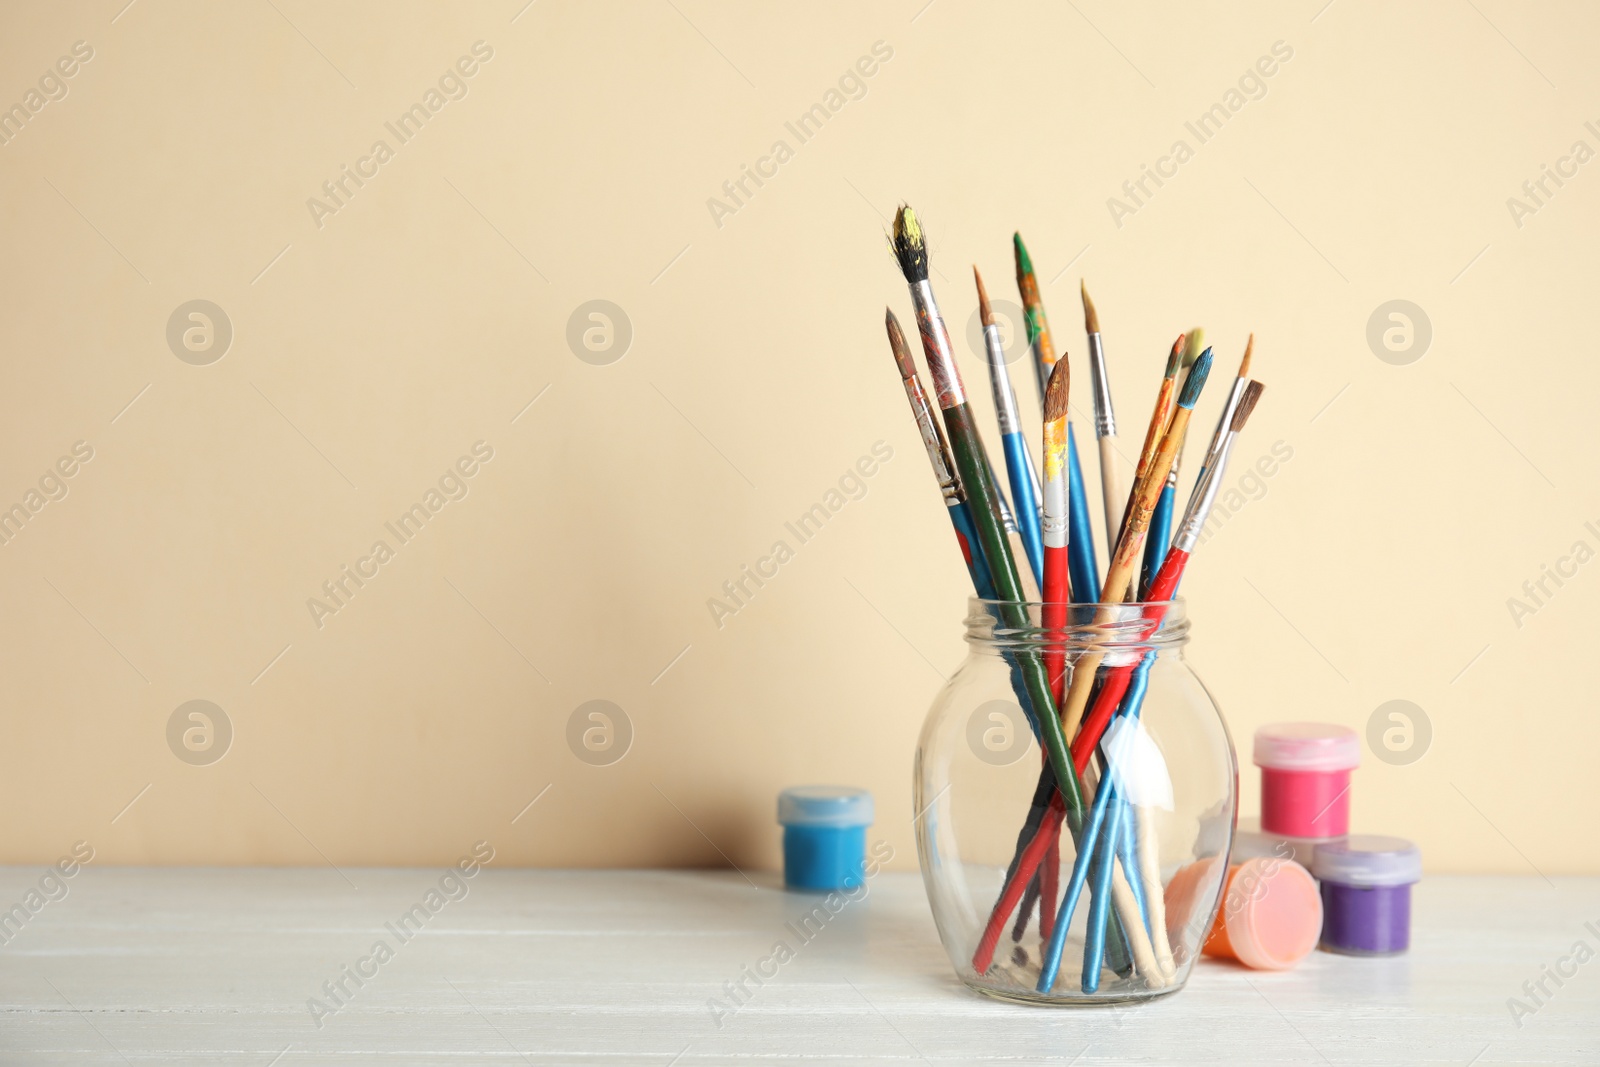 Photo of Glass with brushes and paint jars on table against color background. Space for text